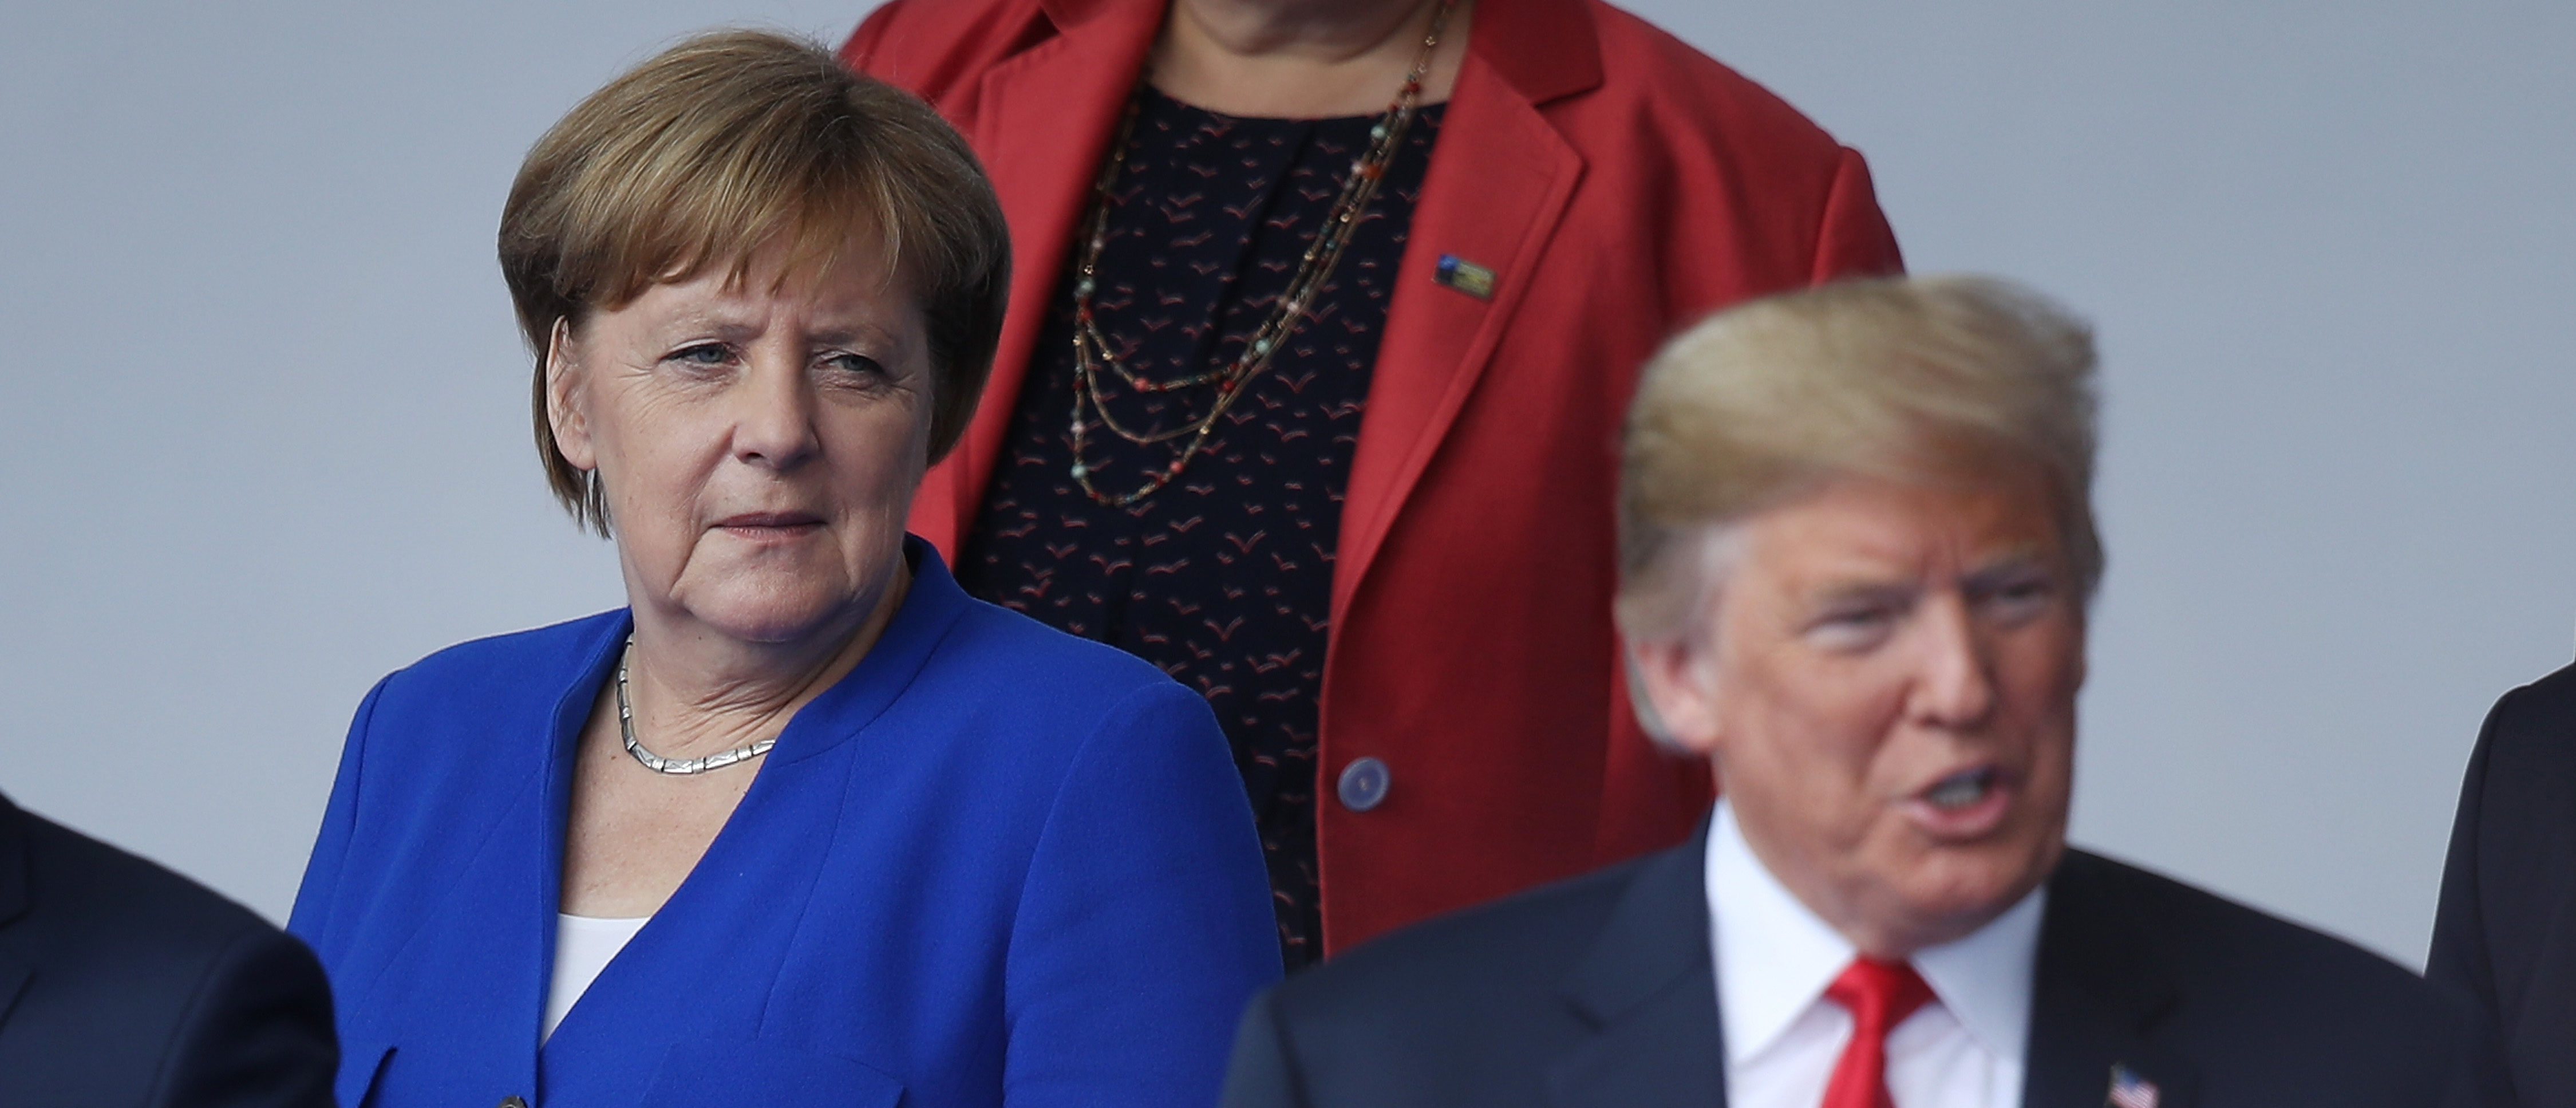 BRUSSELS, BELGIUM - JULY 11: German Chancellor Angela Merkel and U.S. President Donald Trump attend the opening ceremony at the 2018 NATO Summit at NATO headquarters on July 11, 2018 in Brussels, Belgium. Leaders from NATO member and partner states are meeting for a two-day summit, which is being overshadowed by strong demands by U.S. President Trump for most NATO member countries to spend more on defense. (Photo by Sean Gallup/Getty Images)